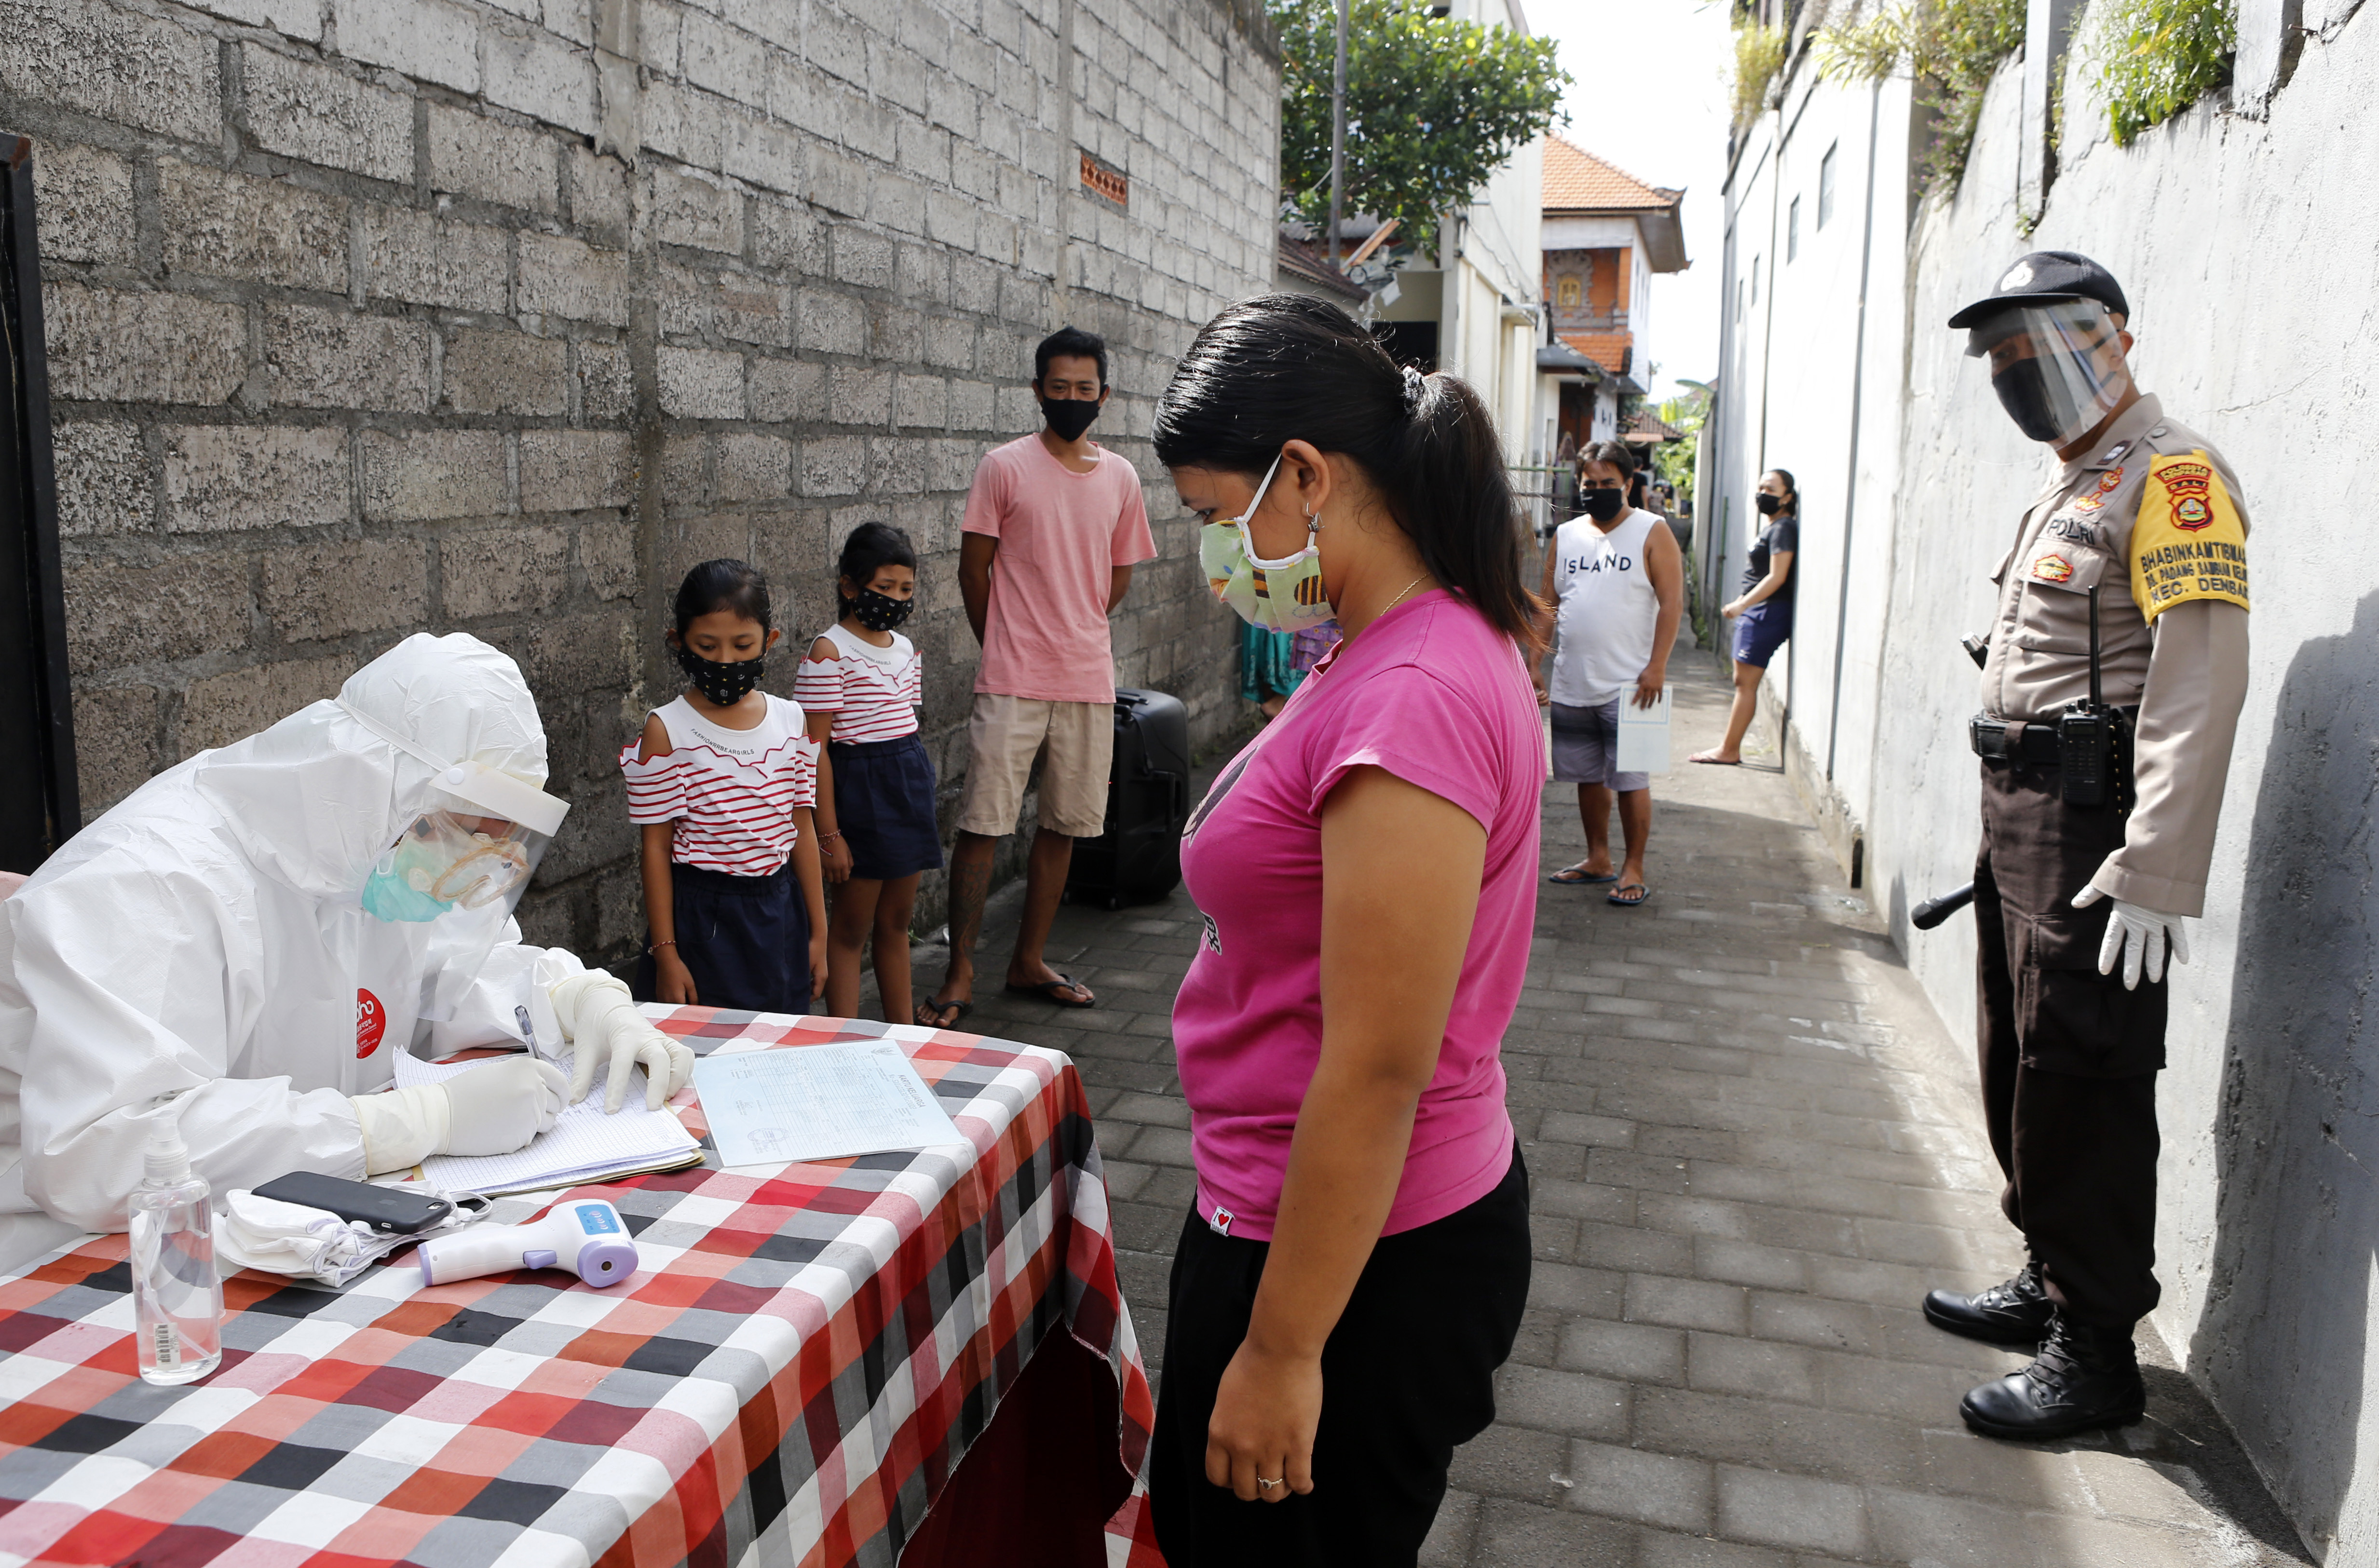 A heath worker checks ID of residents as they queue to receive a coronavirus antibody test at a village in Bali, Indonesia, Wednesday, May 27, 2020. Photo:AP